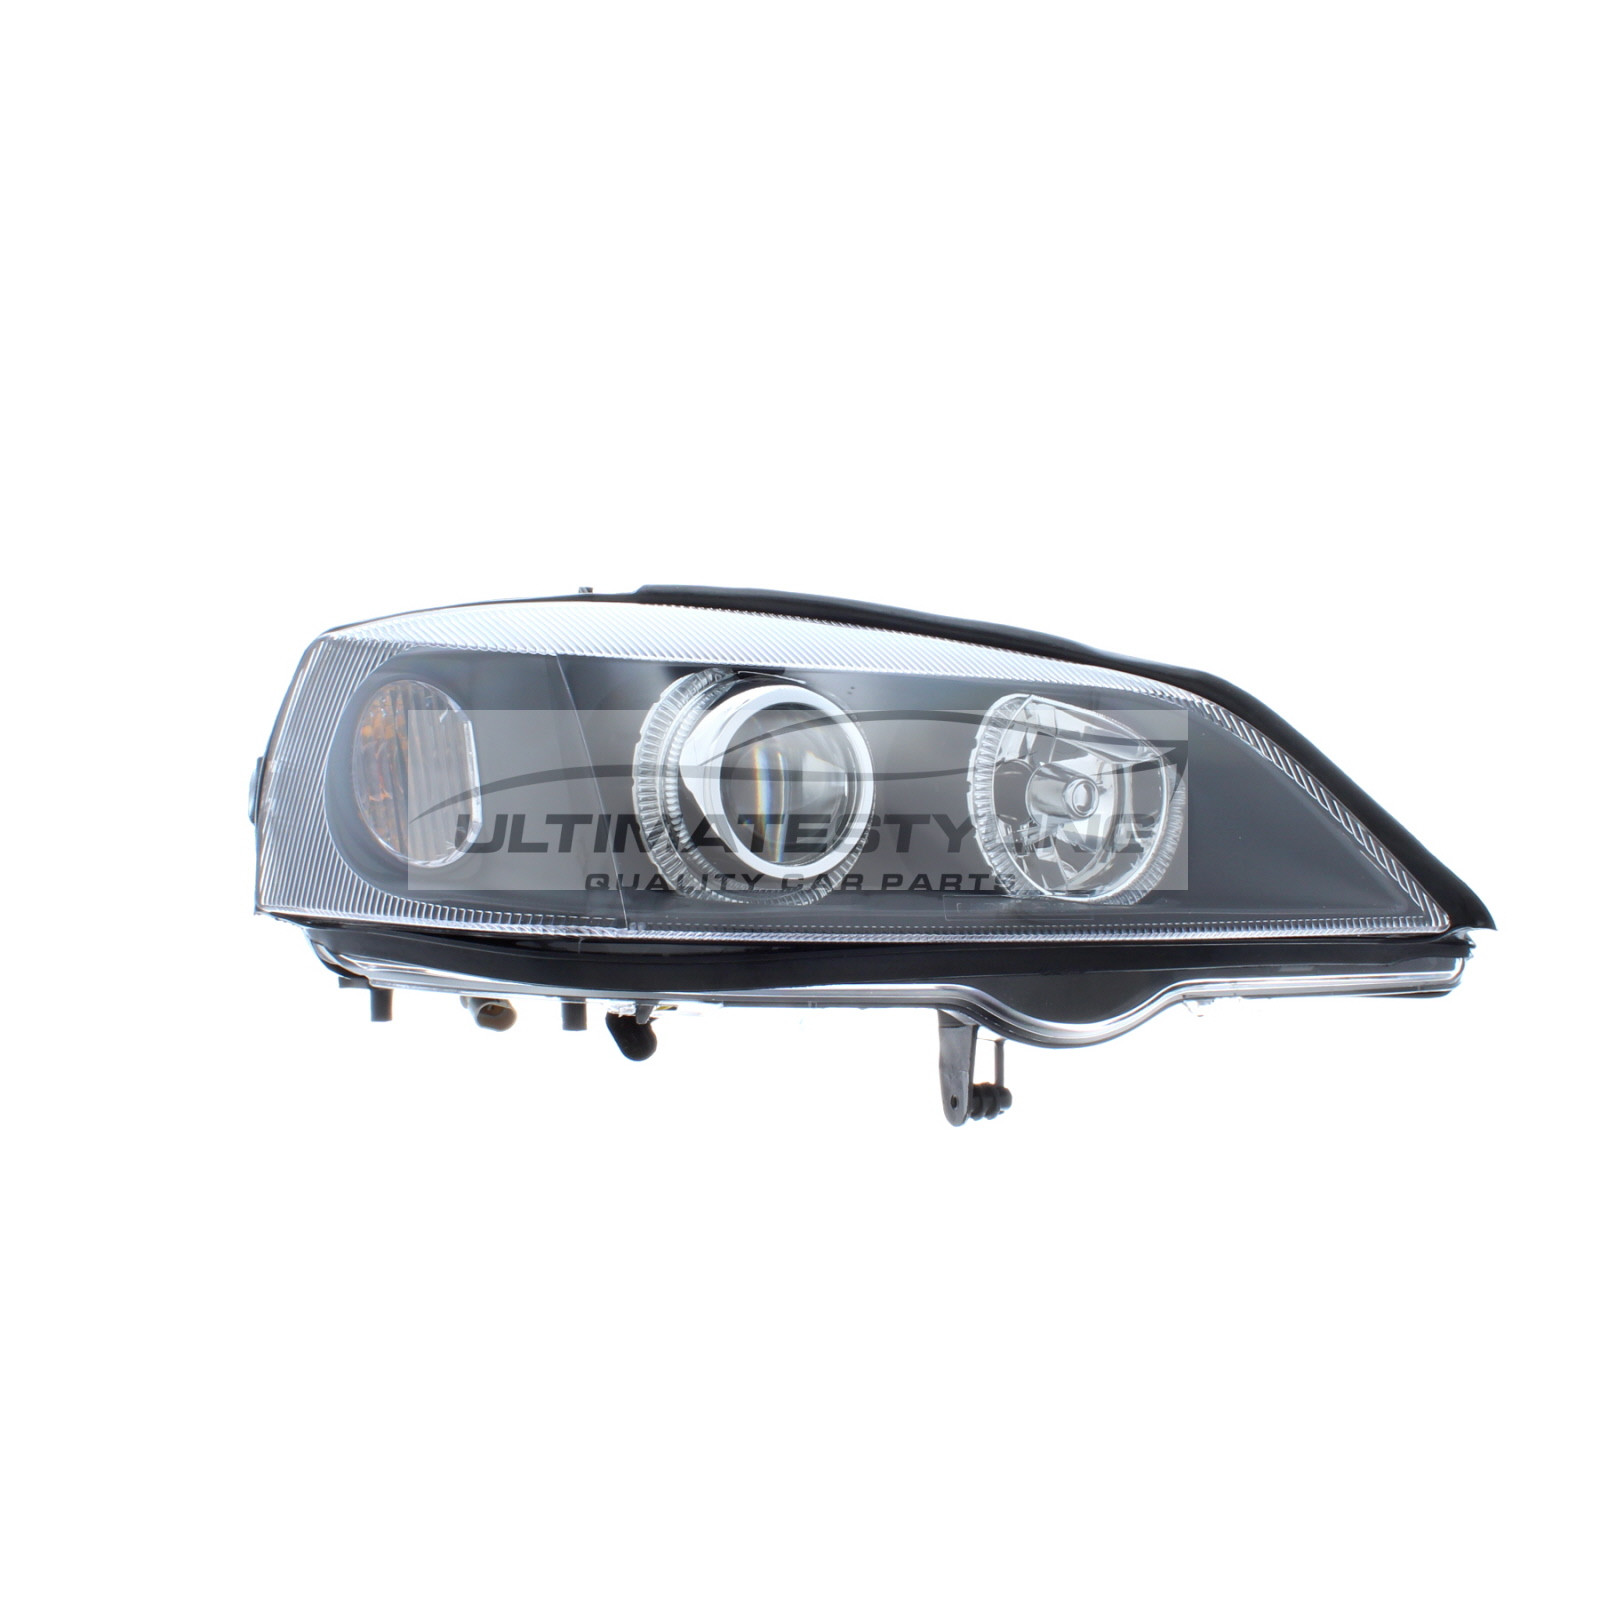 Performance Headlights for Vauxhall Astra